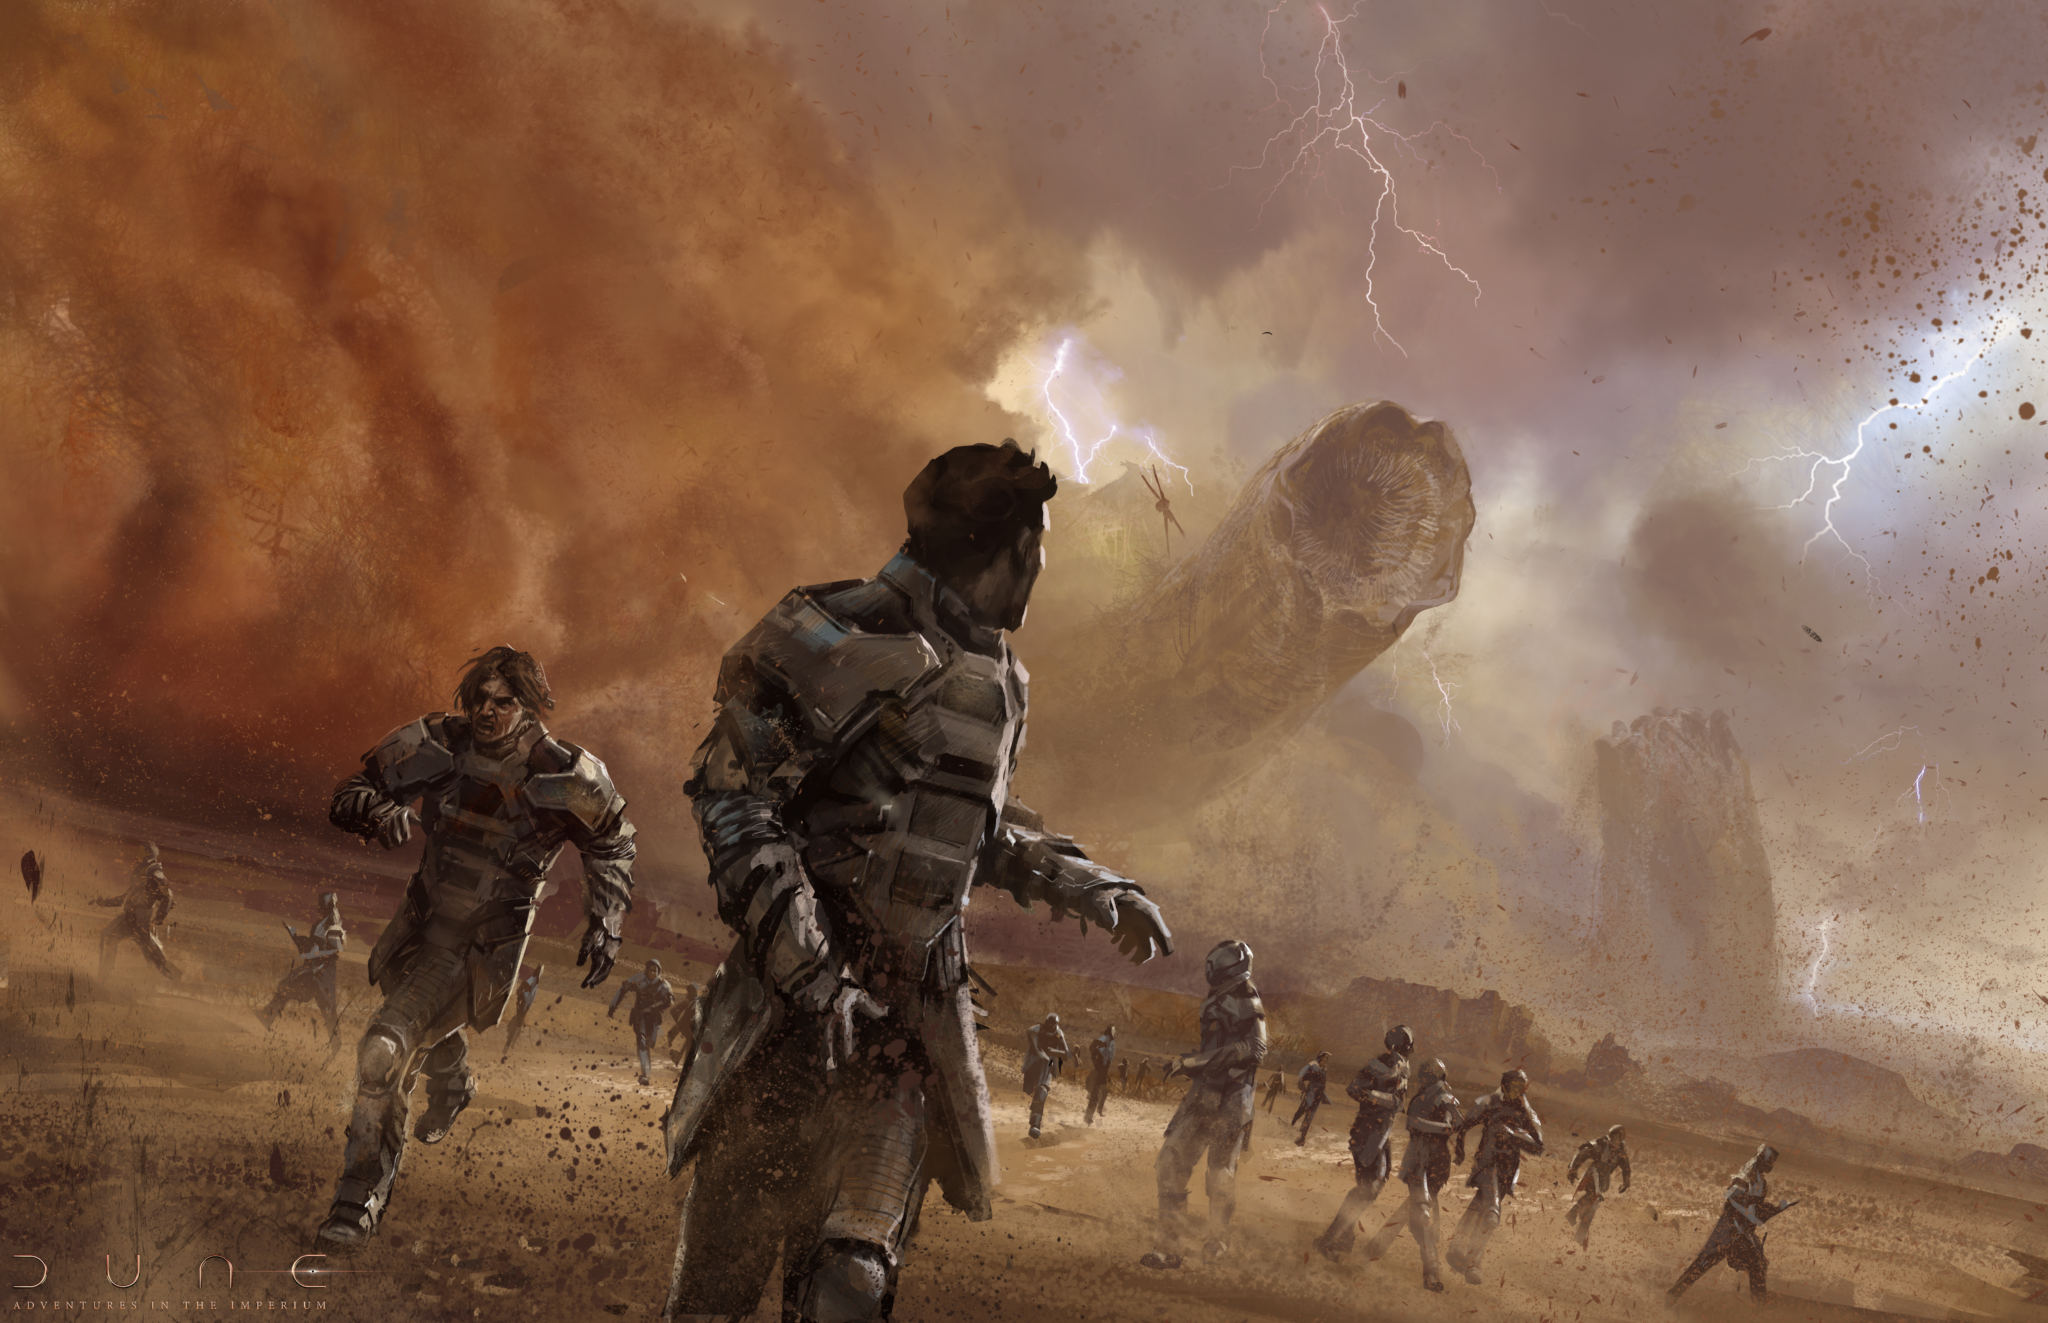 An illustration of Sardaukar in off-white armour running as two sandworms are visible on the horizon behind them.